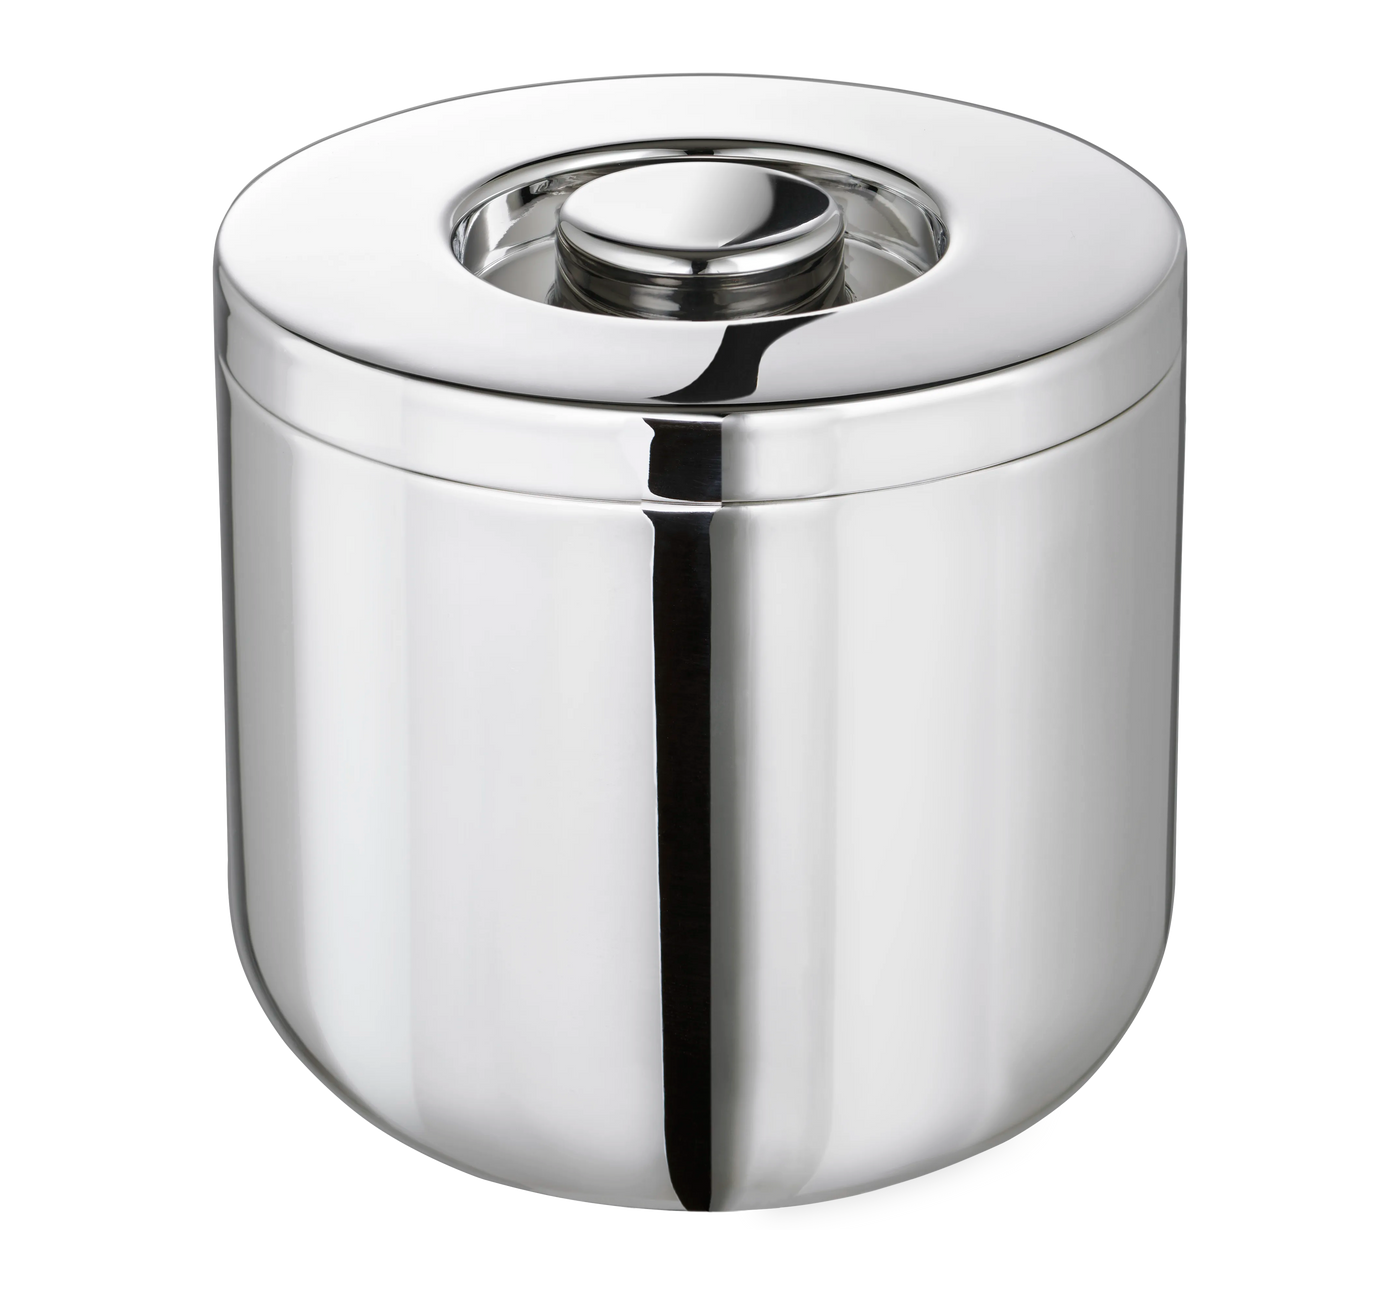 CHRISTOFLE ICE BUCKET STAINLESS STEEL INSULATED